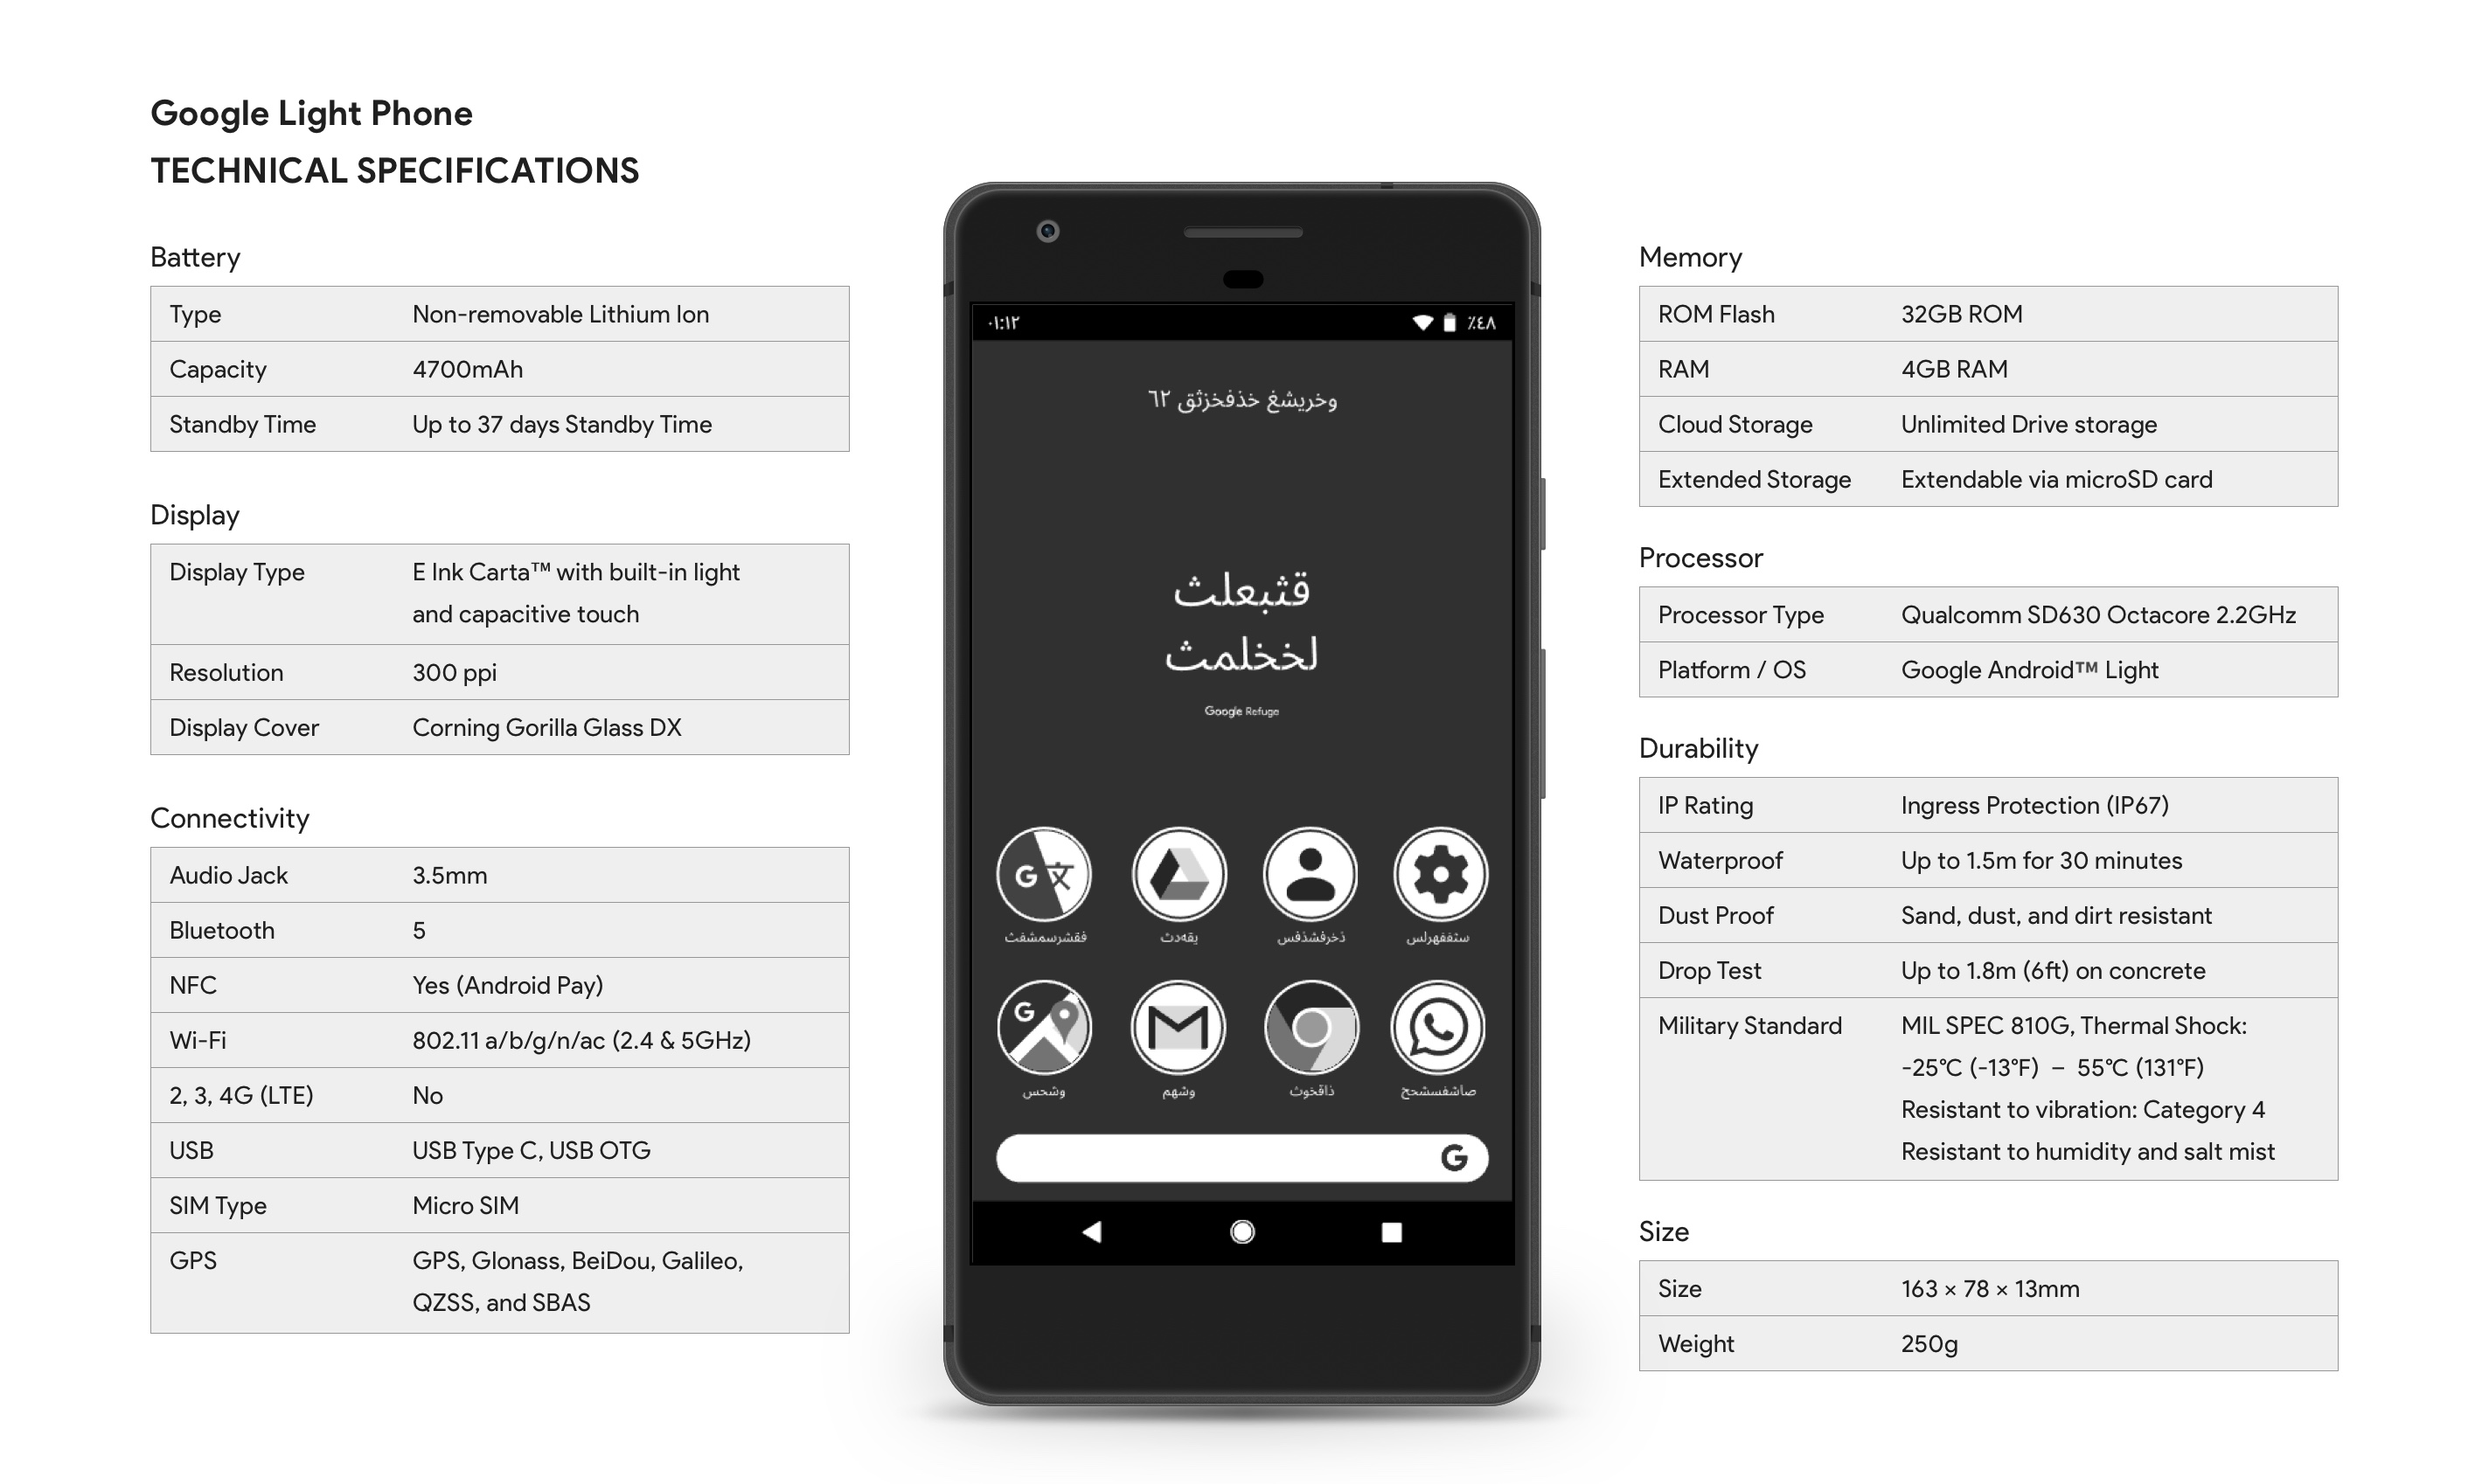 The Google Light Phone technical specifications